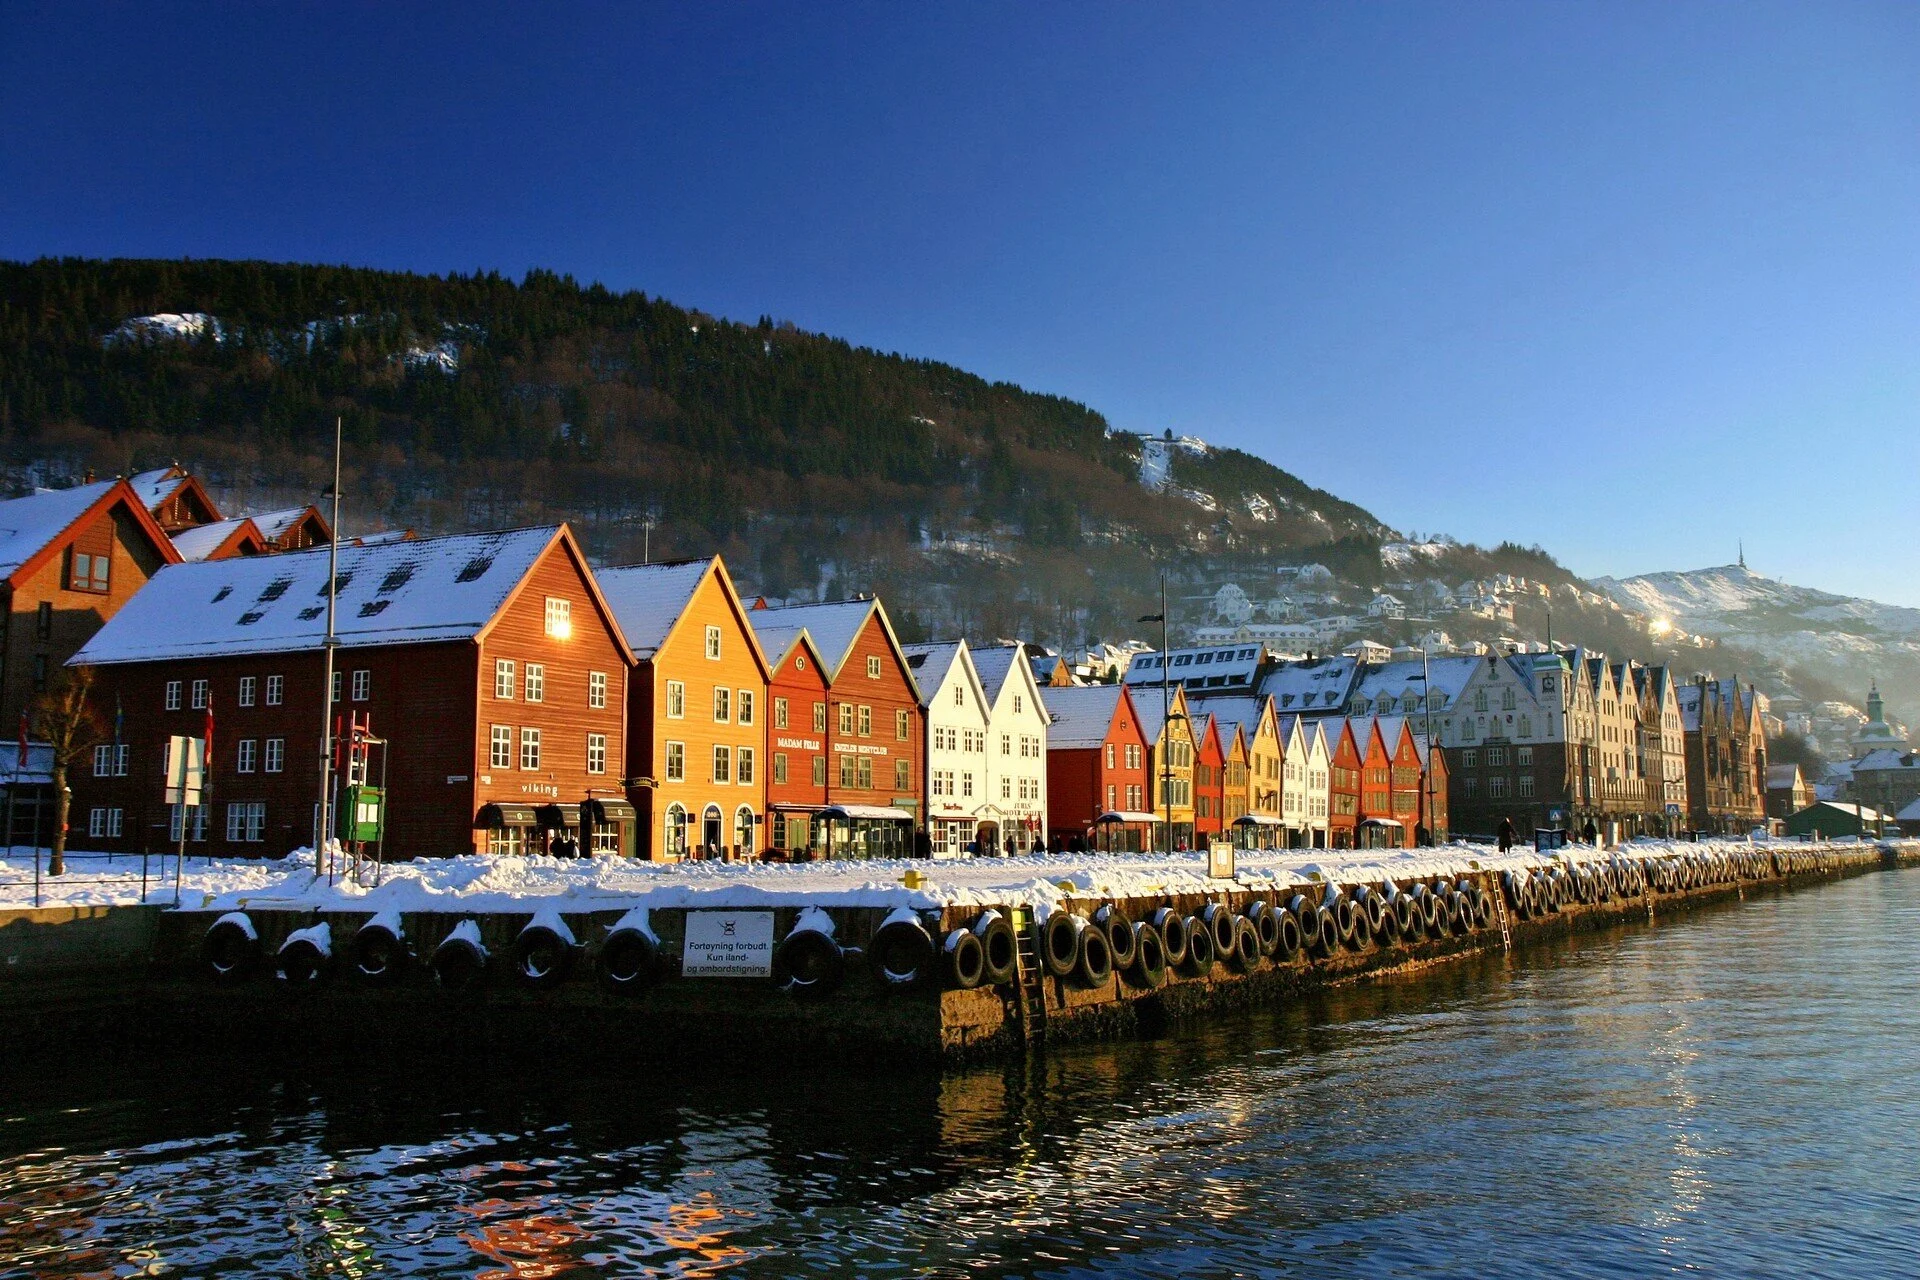 bergen_norway_hgr_148872_1920_photo_getty_images-1